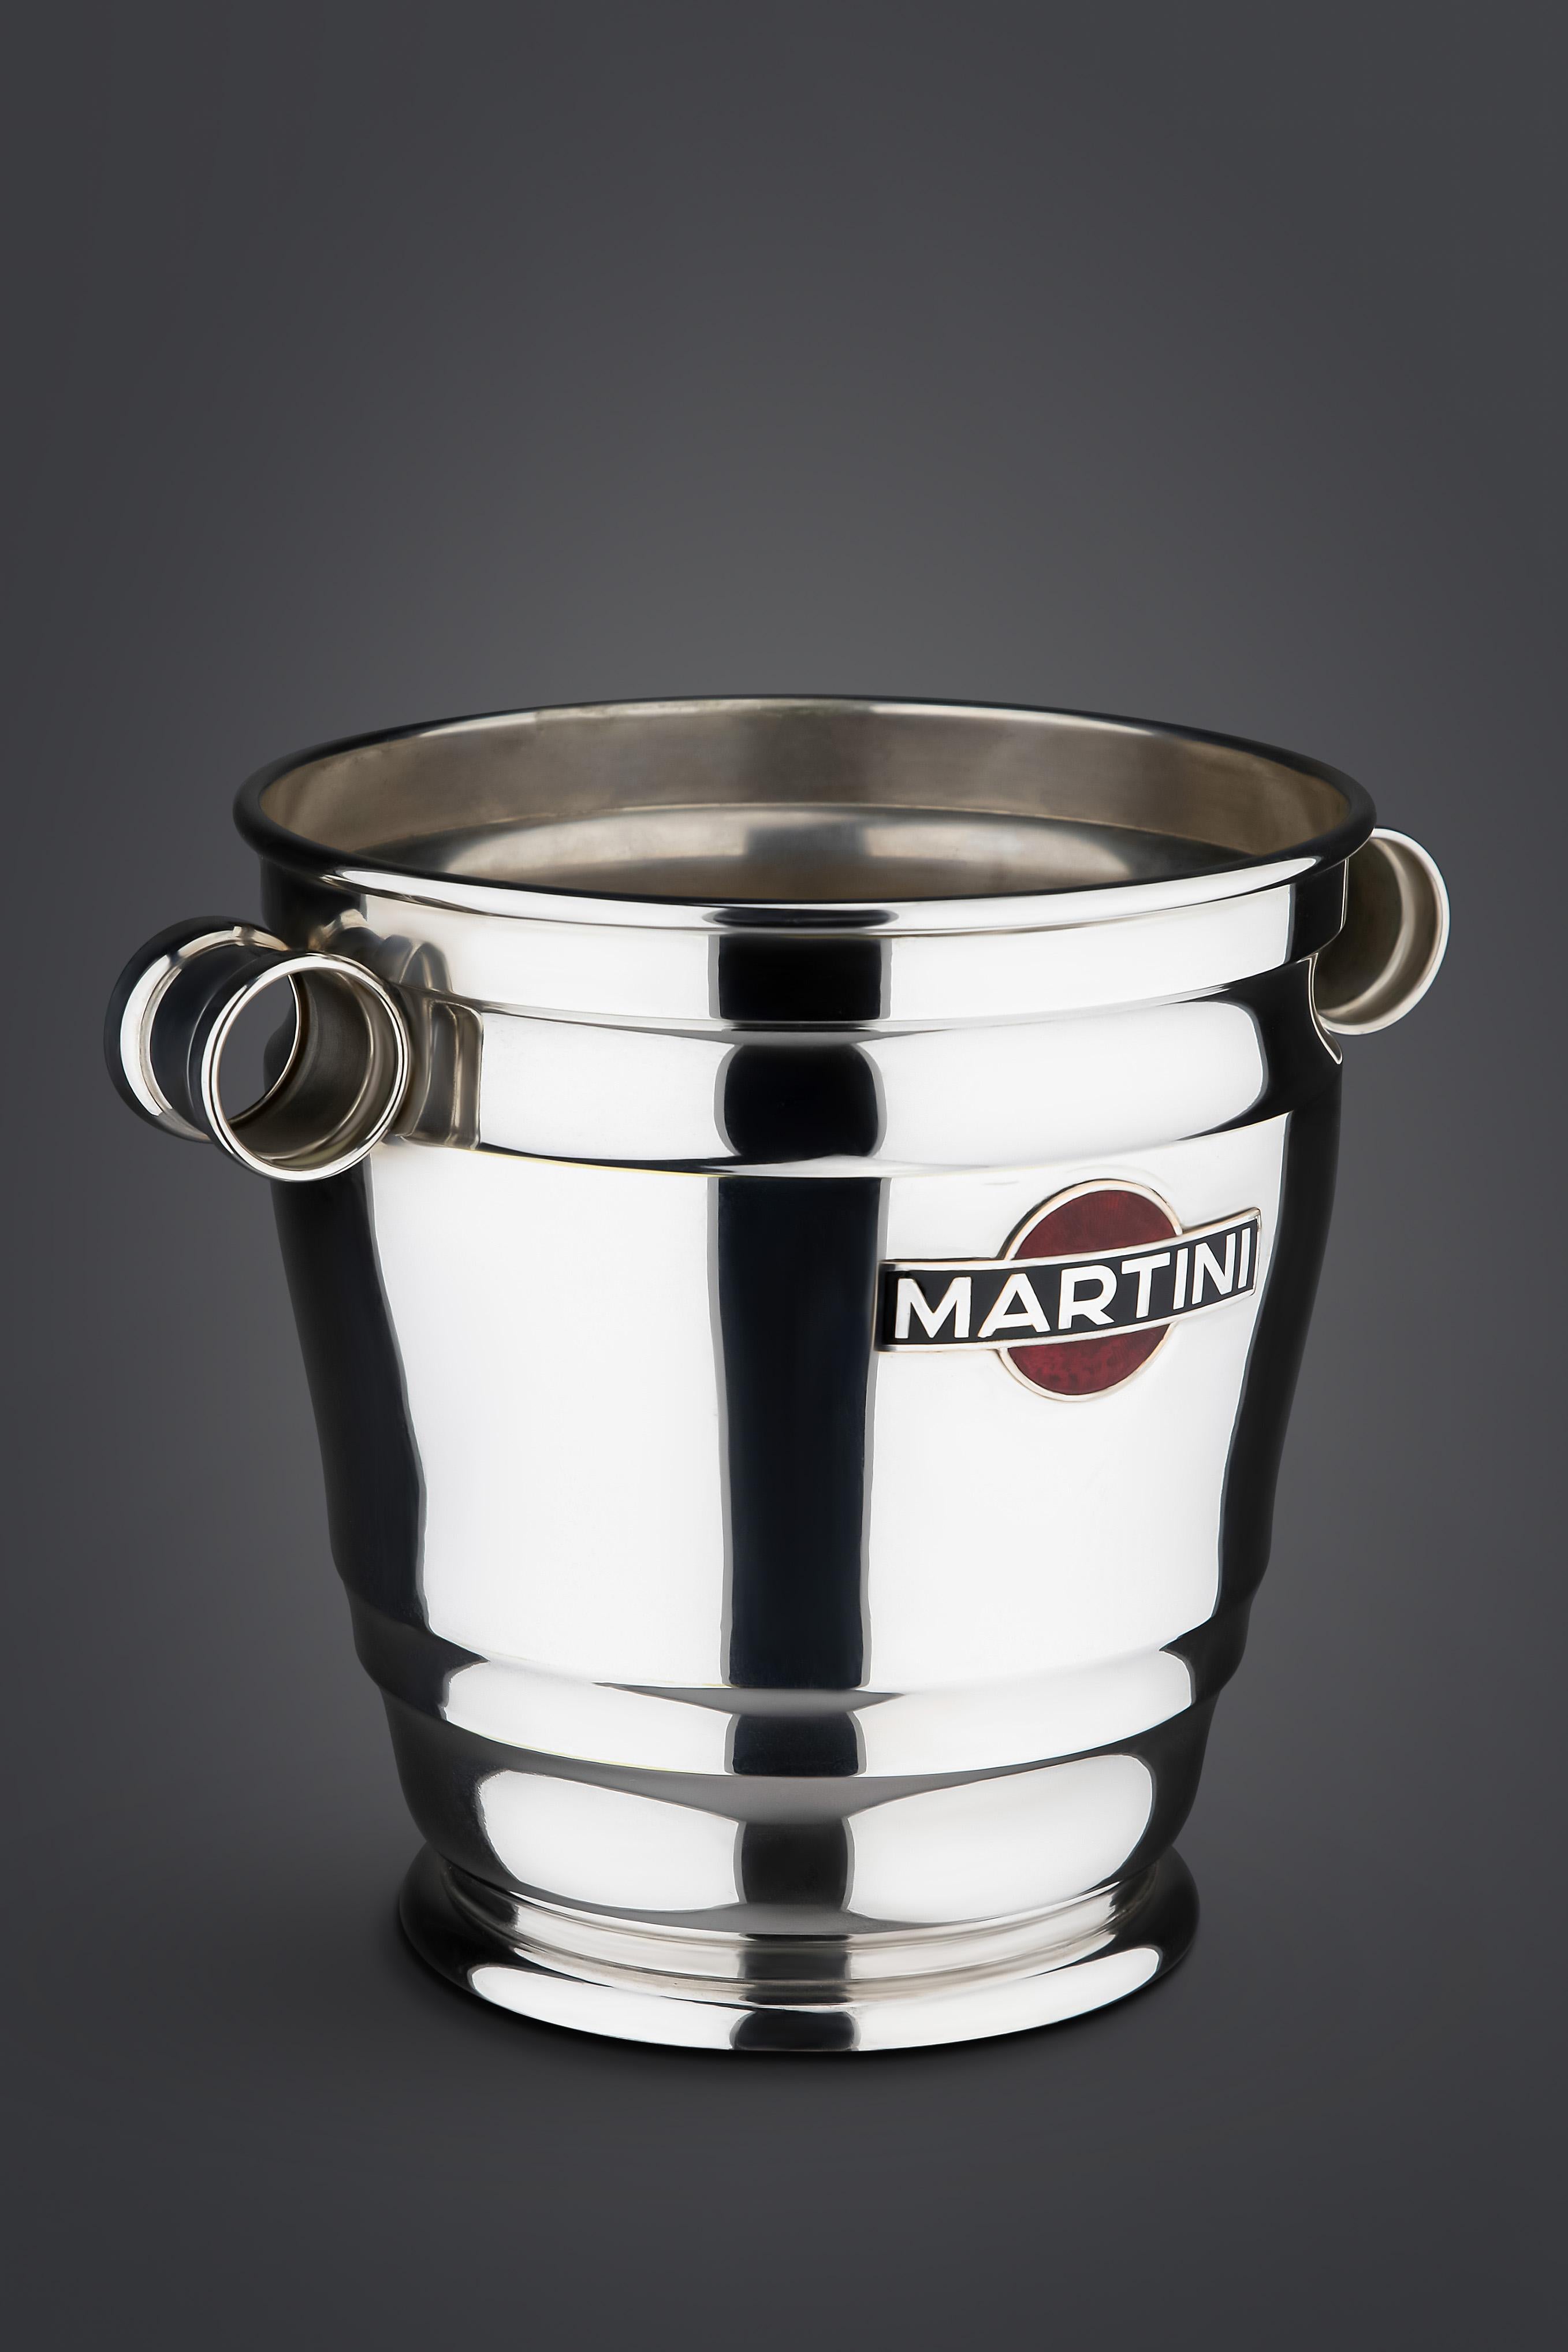 Martini Silver Plated and Enamel Champagne Cooler 19609 In Good Condition For Sale In Weesp, NL